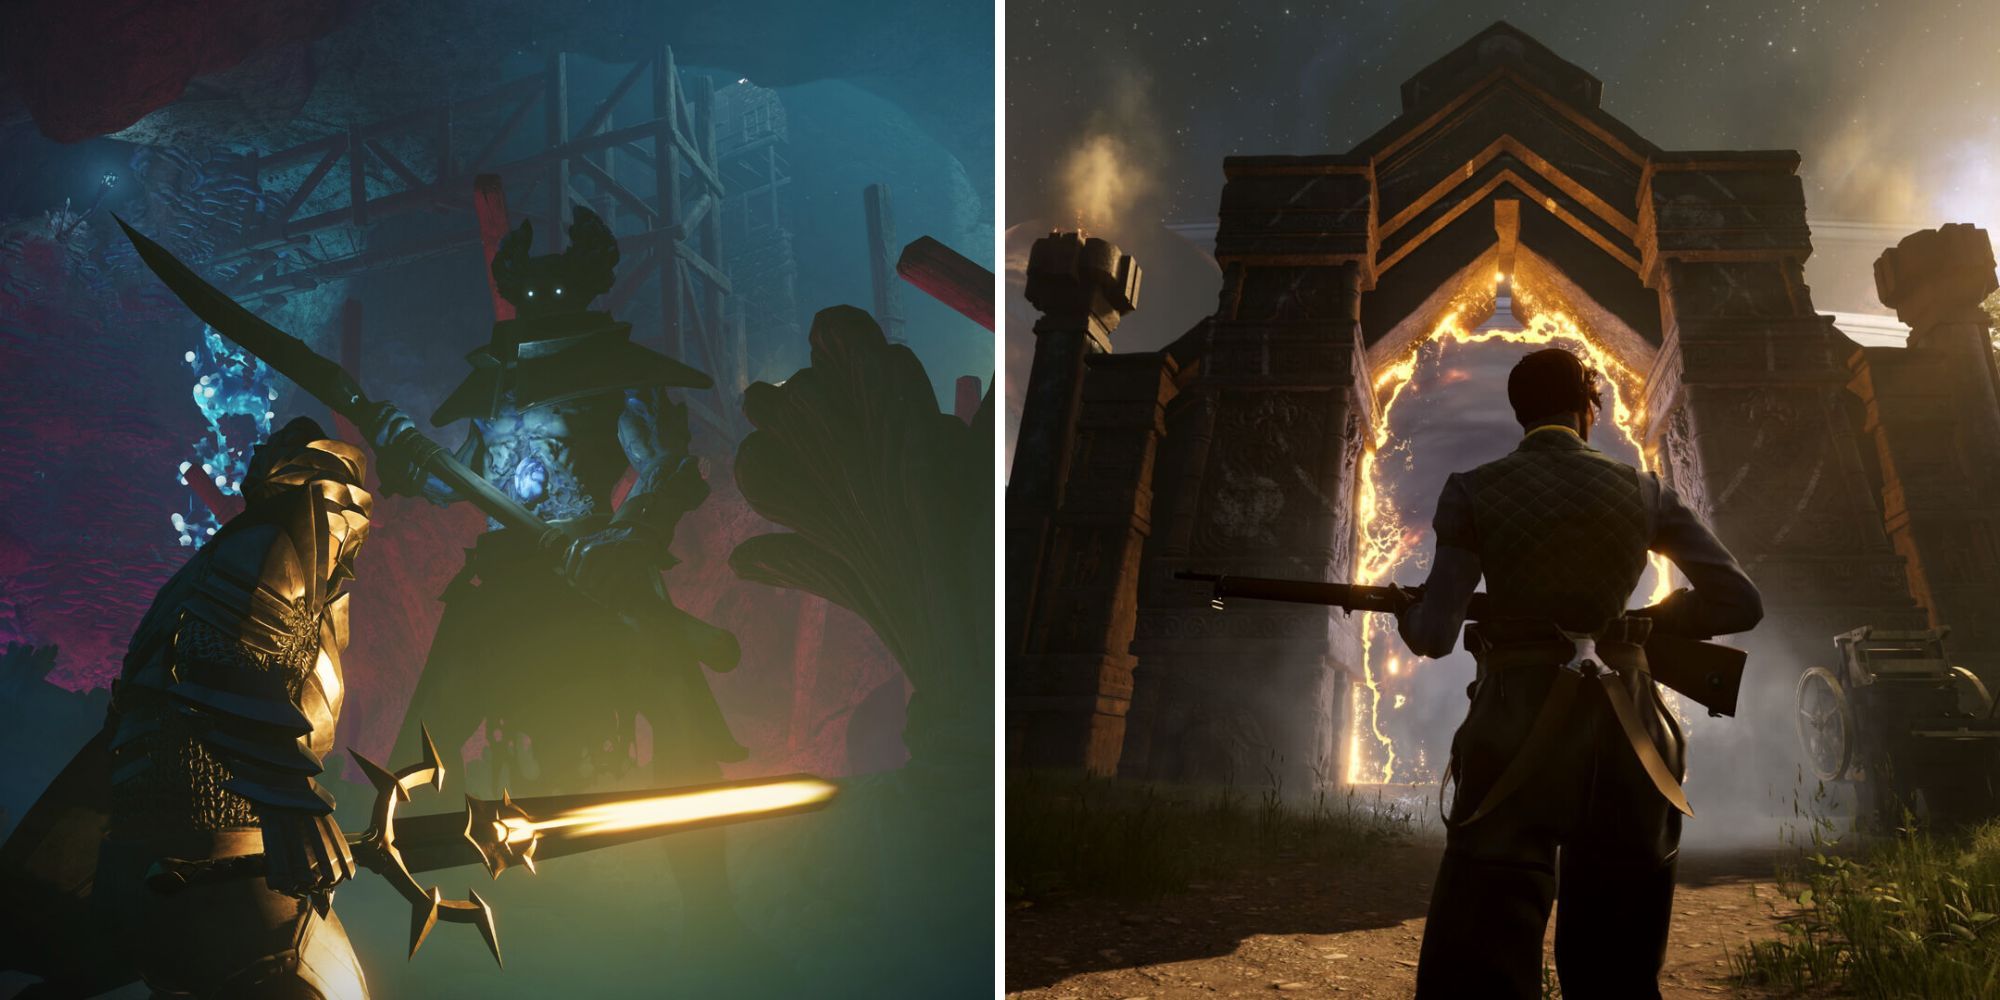 Sword-wielding Flameborn faces a Fell Thunderbrute in Enshrouded; Realmwalker holds a rifle while facing a newly opened portal in Nightingale